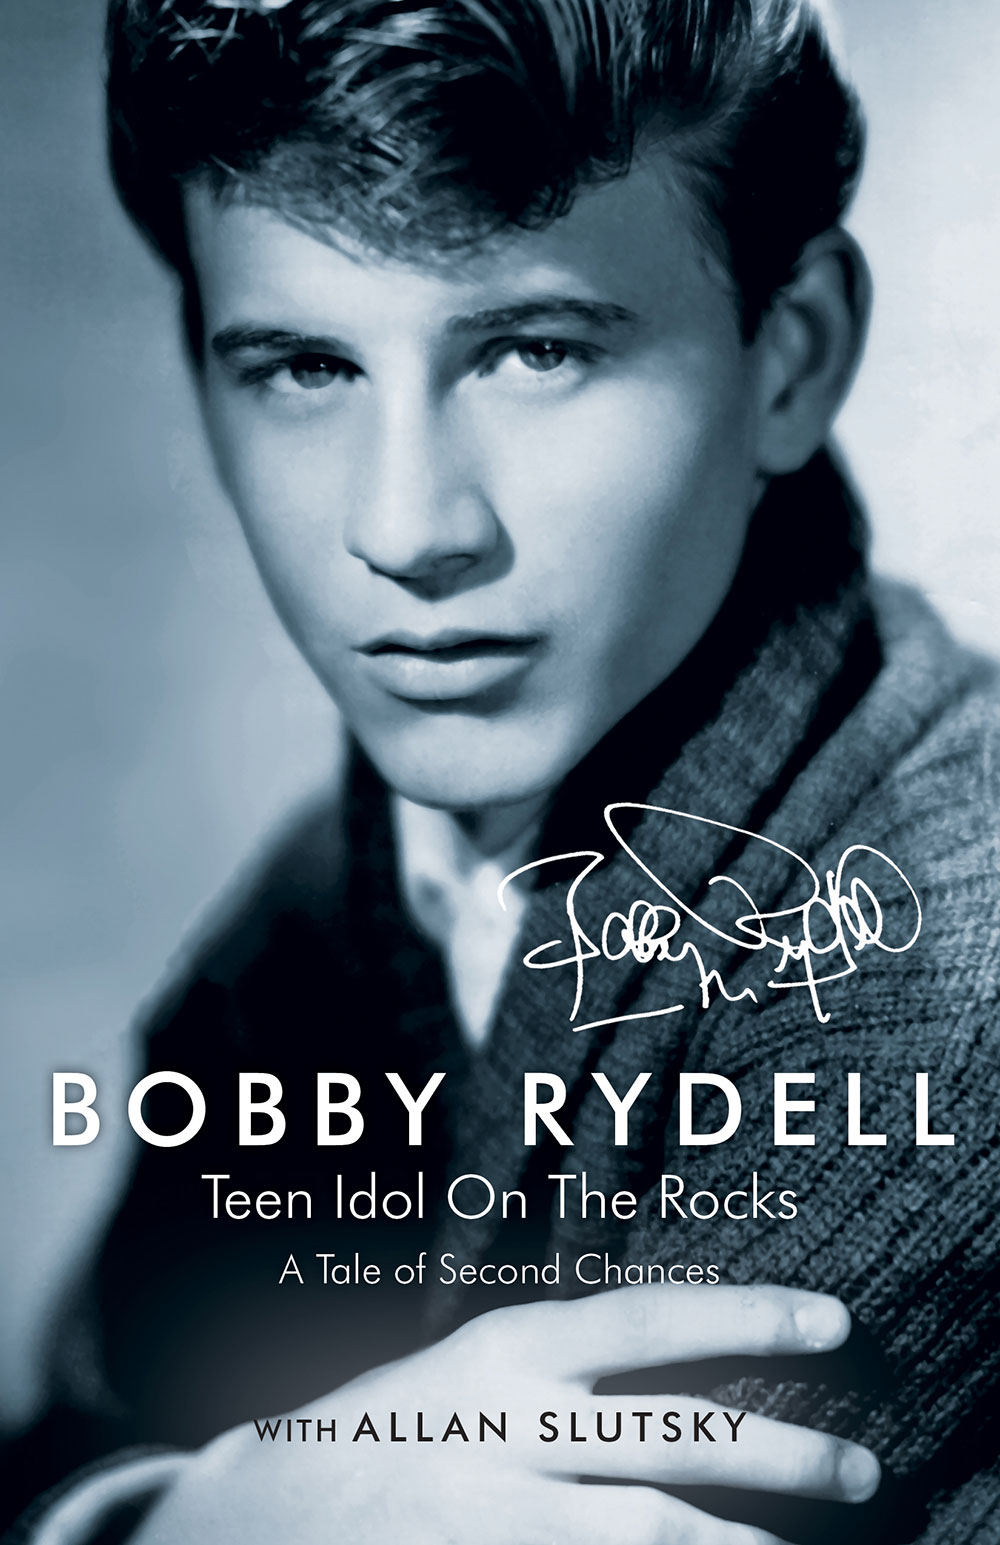 TEEN IDOL ON THE ROCKS: A Tale of Second Chances